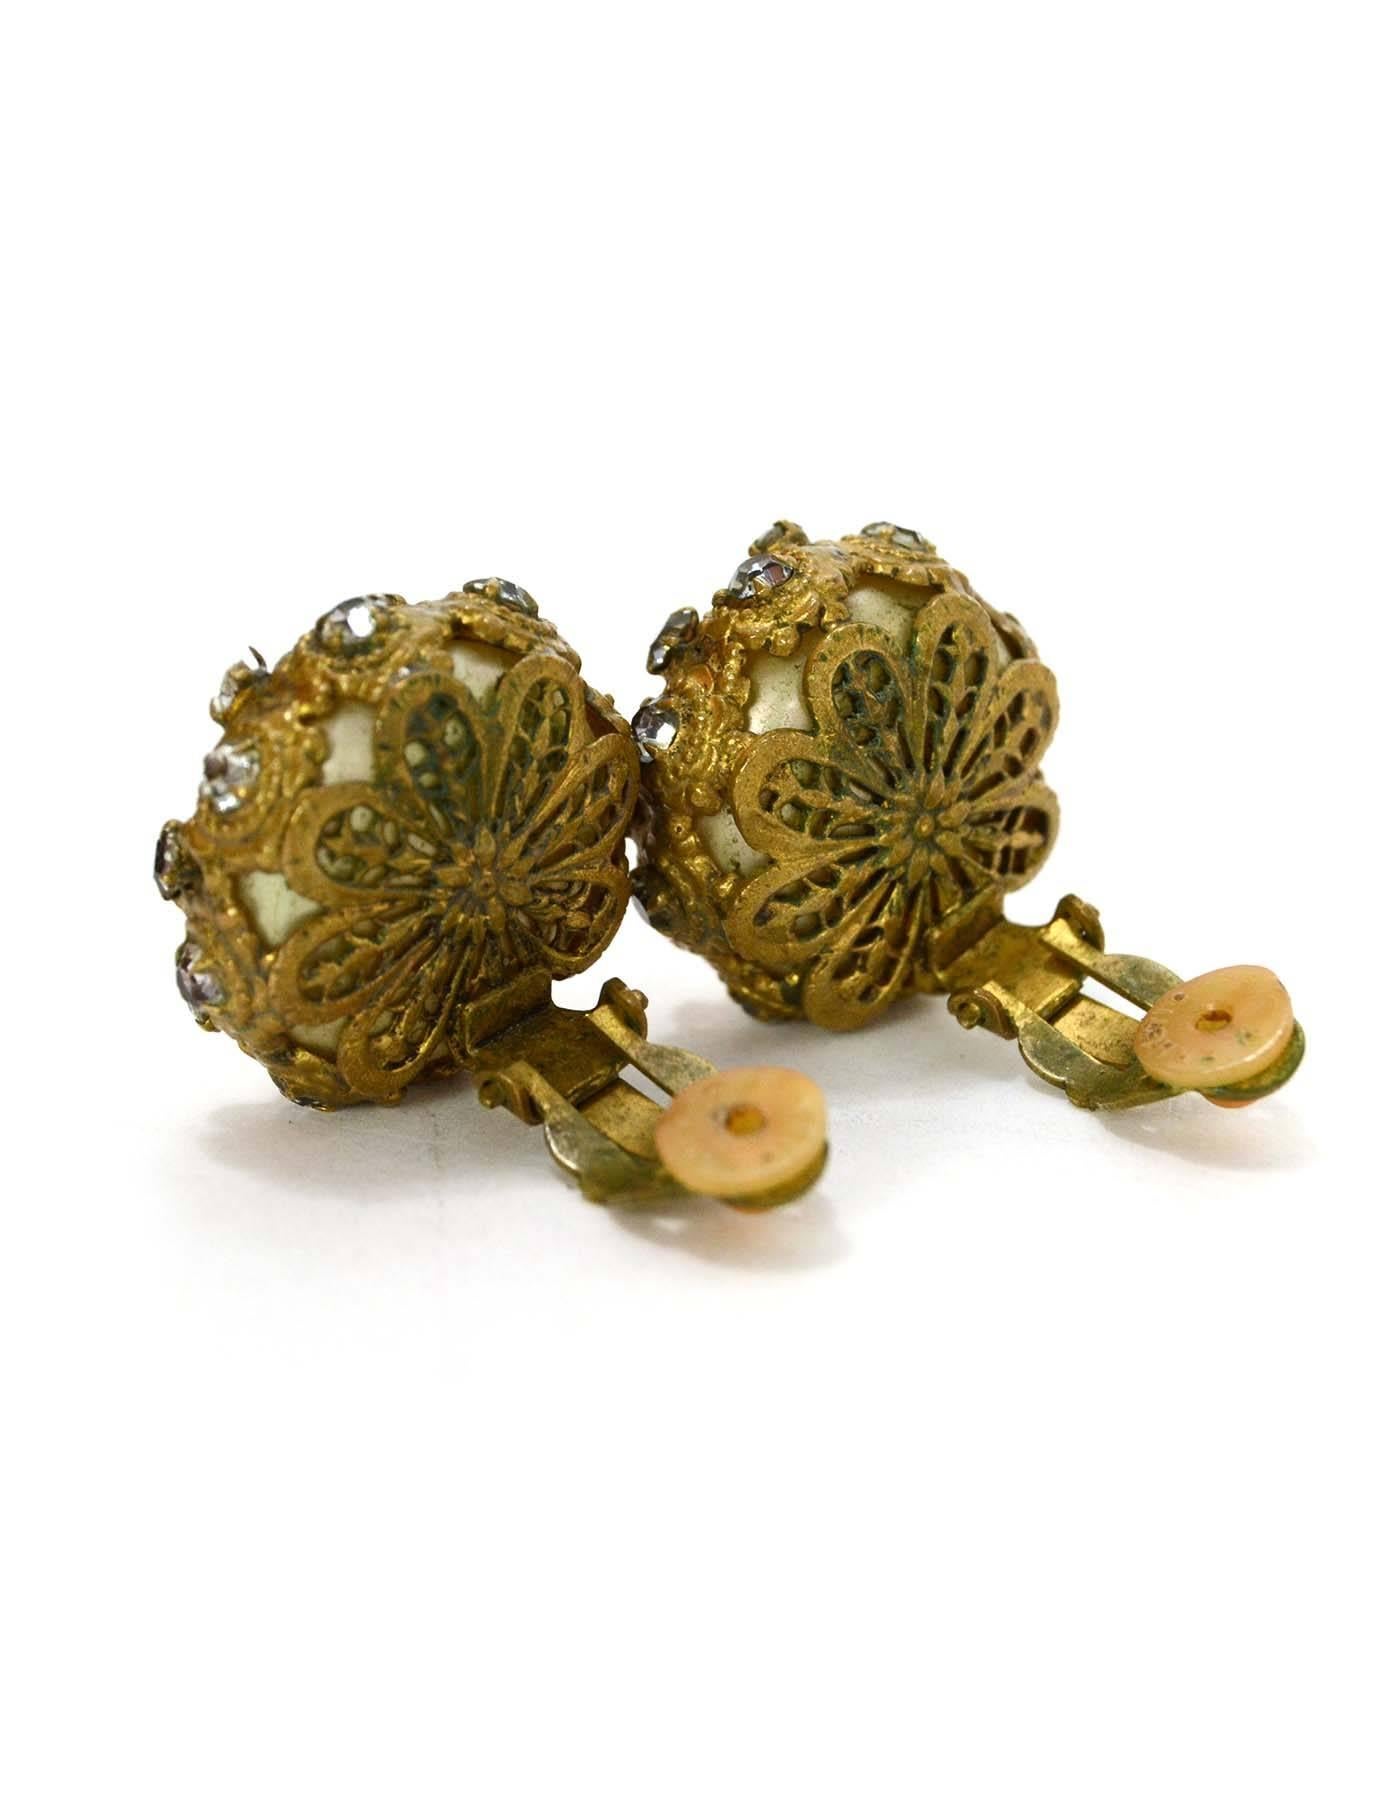 Chanel Vintage '50s Pearl & Crystal Clip On Earrings 
Features intricate detailing throughout goldtone portion

Made In: France
Year of Production: 1950's
Color: Goldtone and white
Materials: Metal, crystal and faux pearl
Closure: Clip